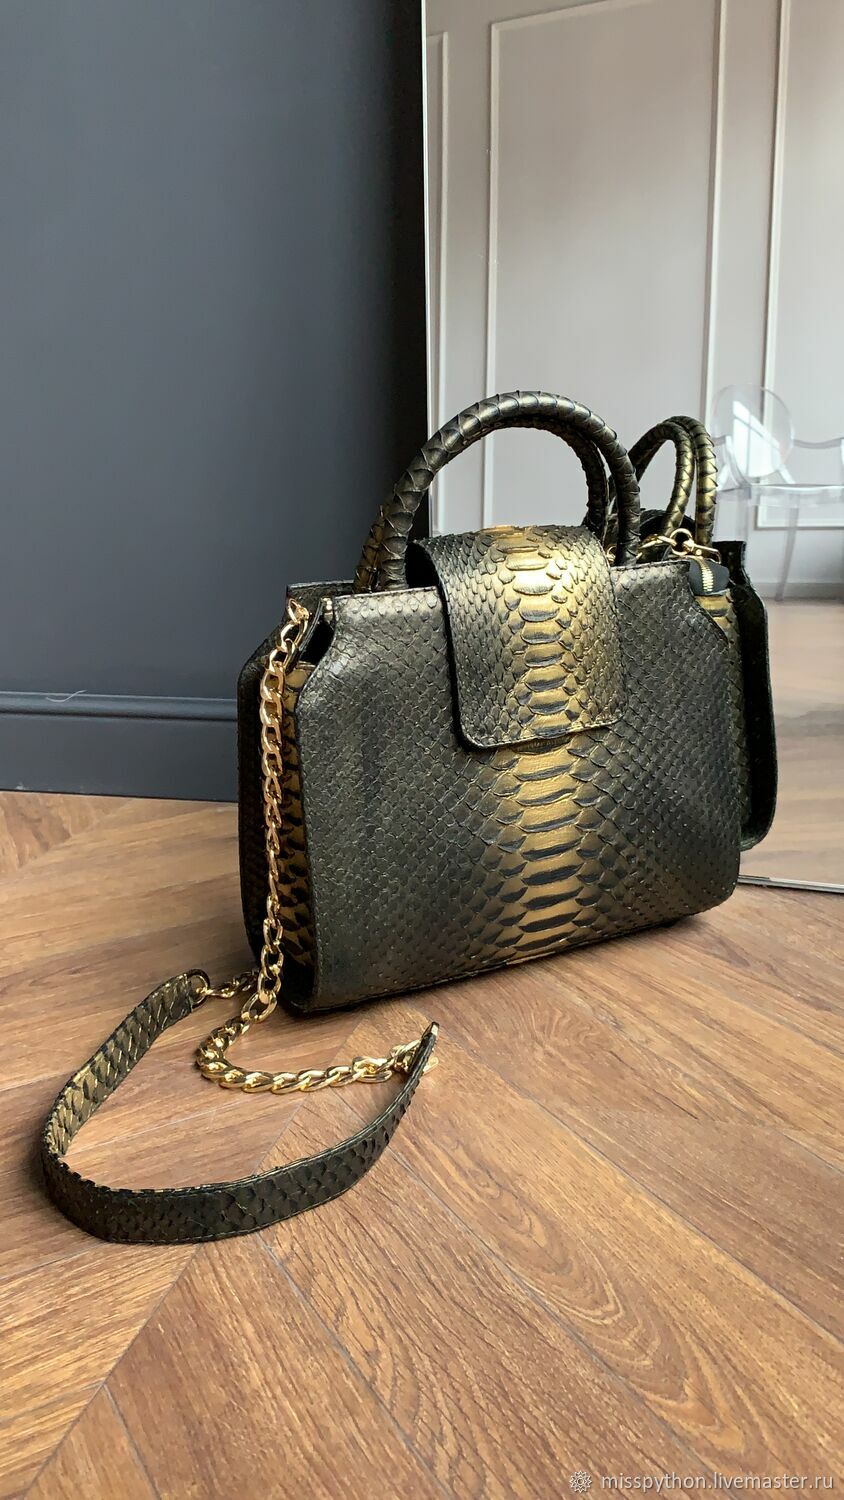 Leather women's bag made of python skin from a snake, Classic Bag, Izhevsk,  Фото №1